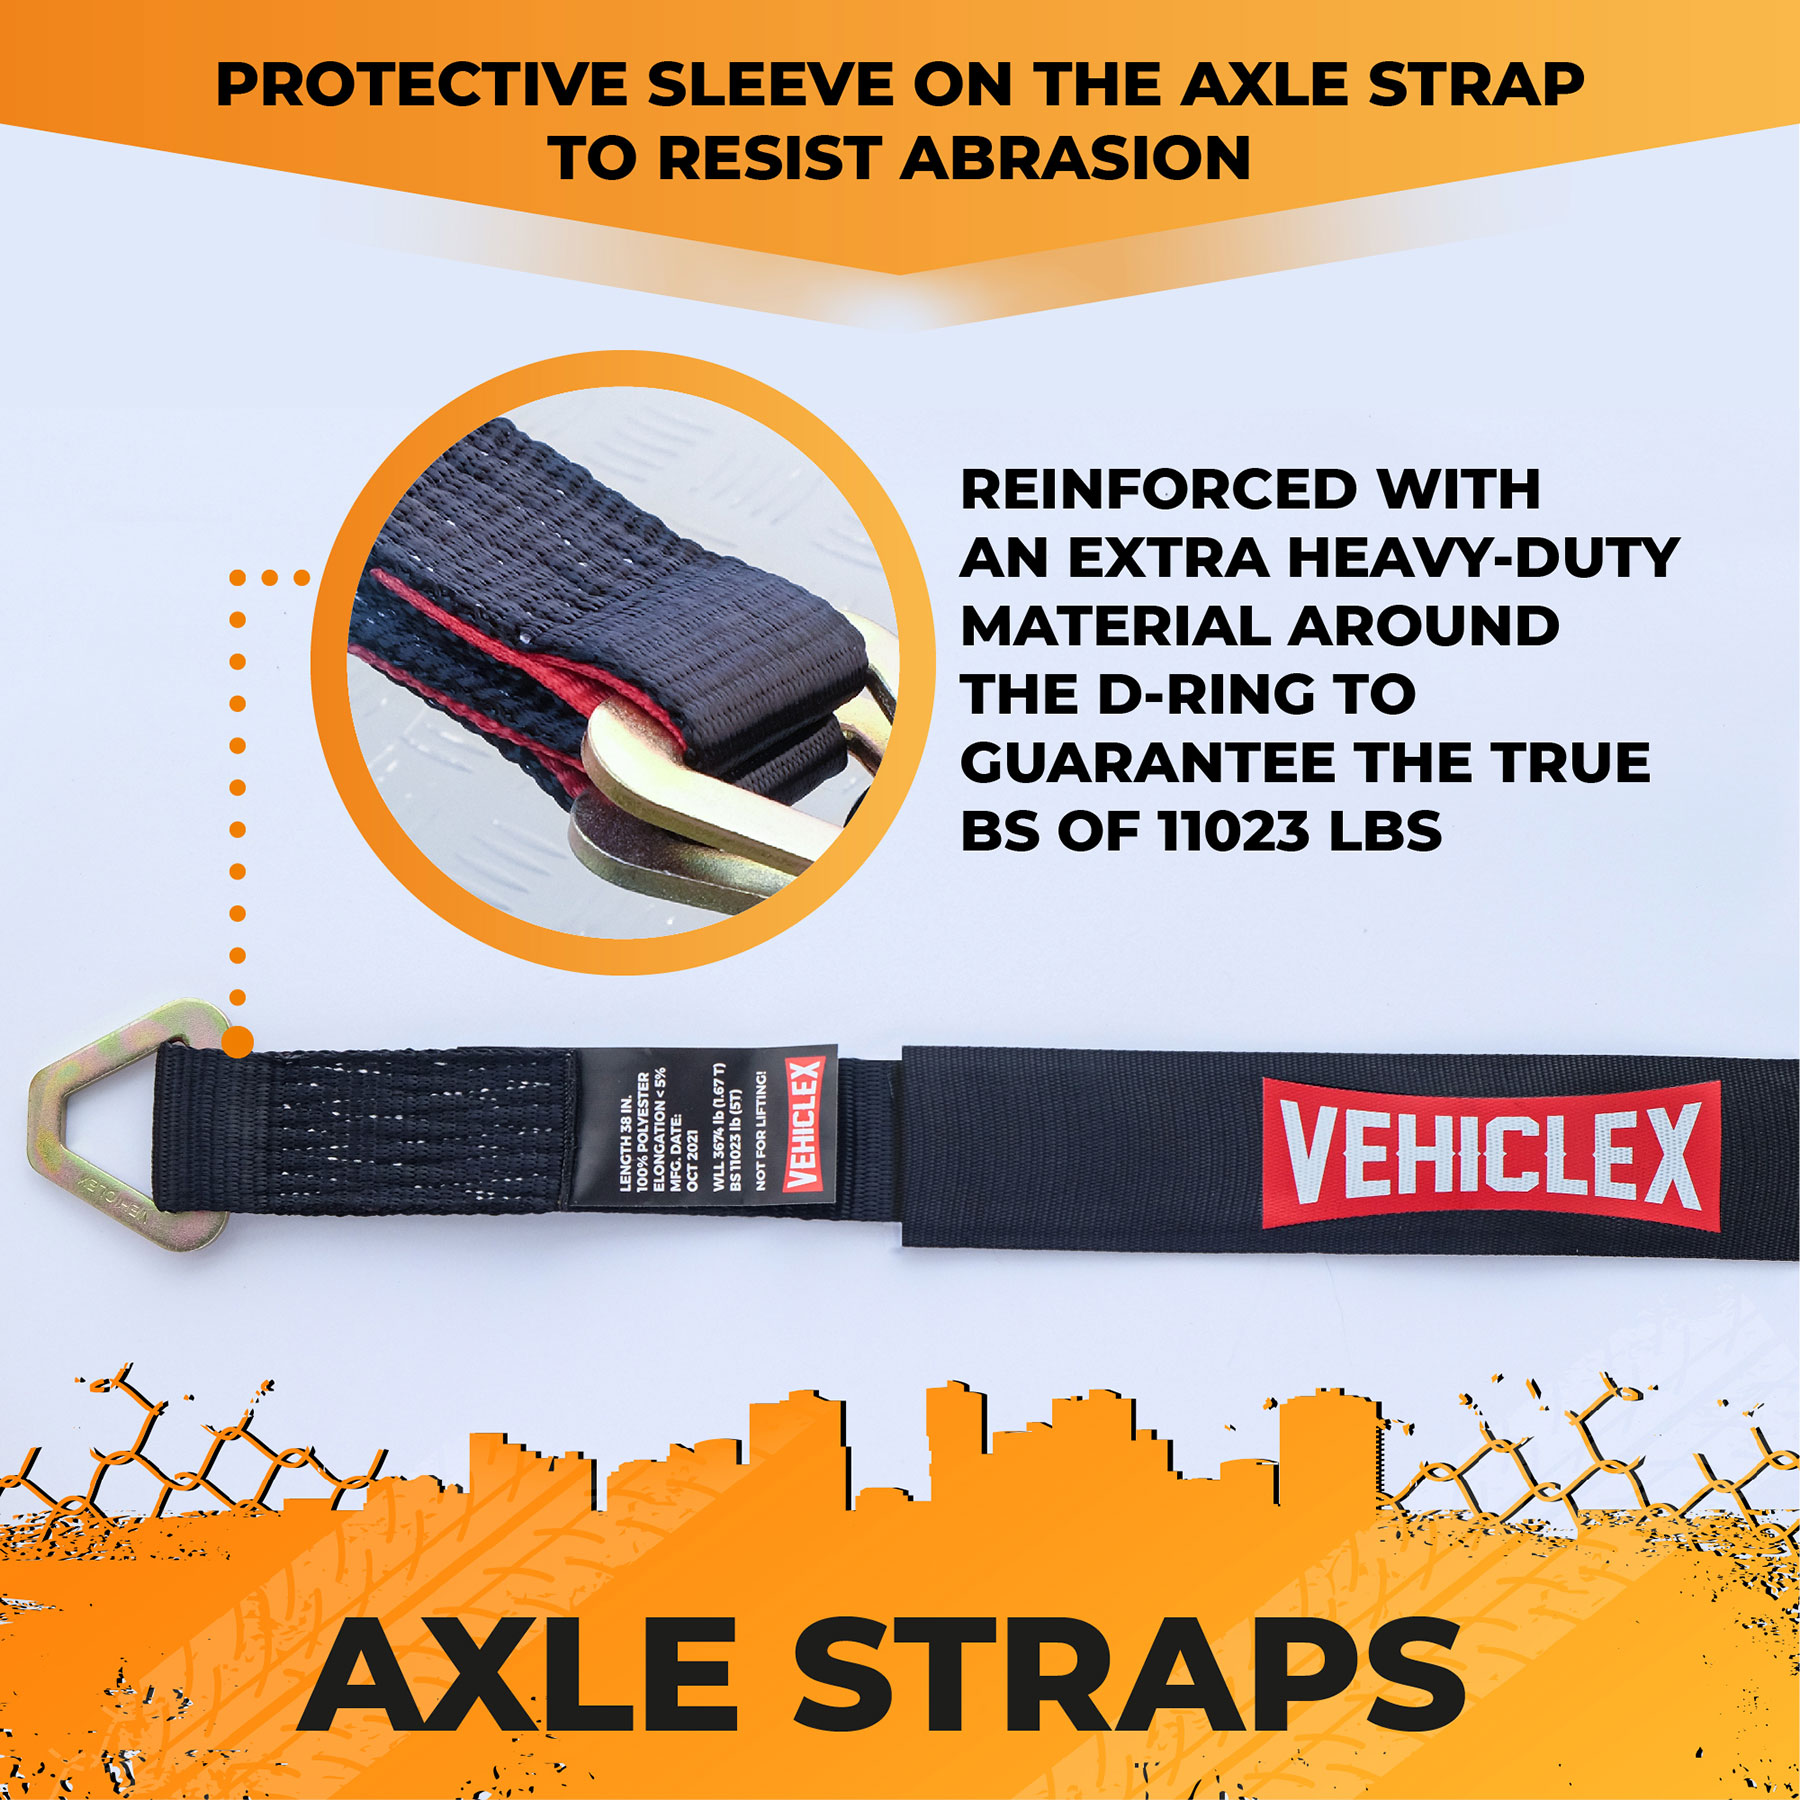 4-Vehiclex-car-tie-down-straps-for-trailer-vehicle-hauling-with-axle-straps-s